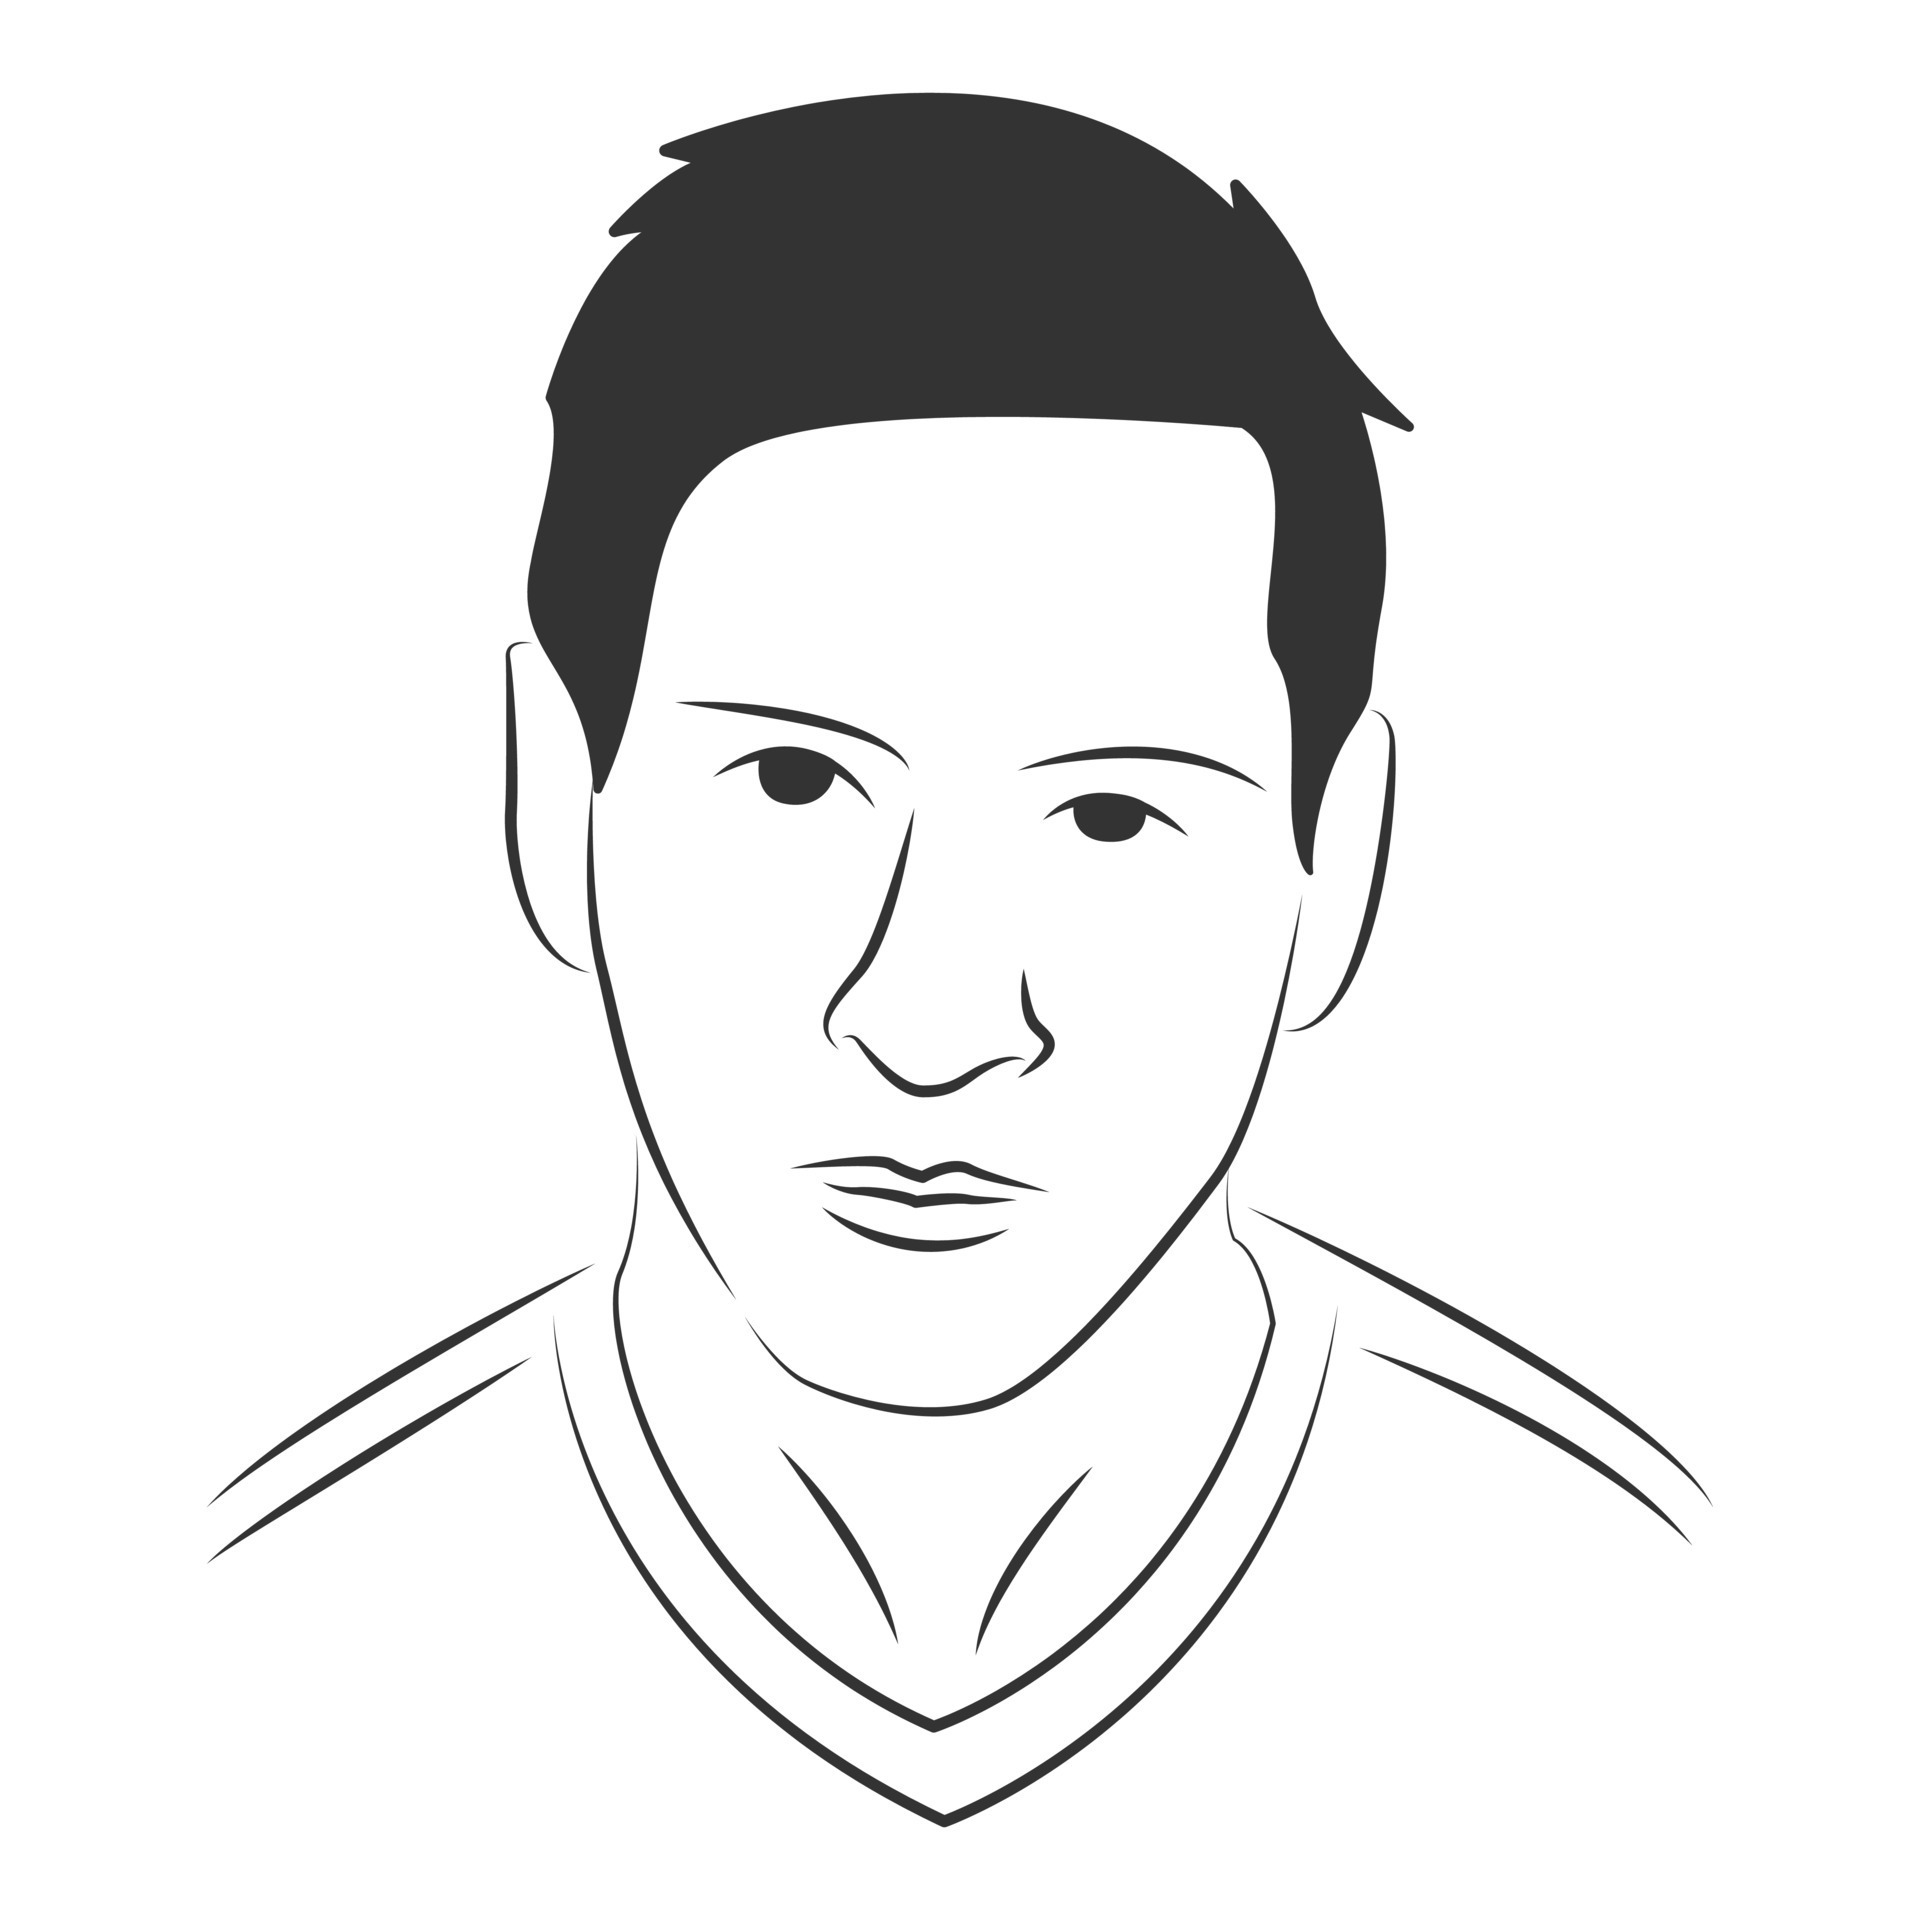 Jonathan Wood pencil drawing - Lionel Messi 2